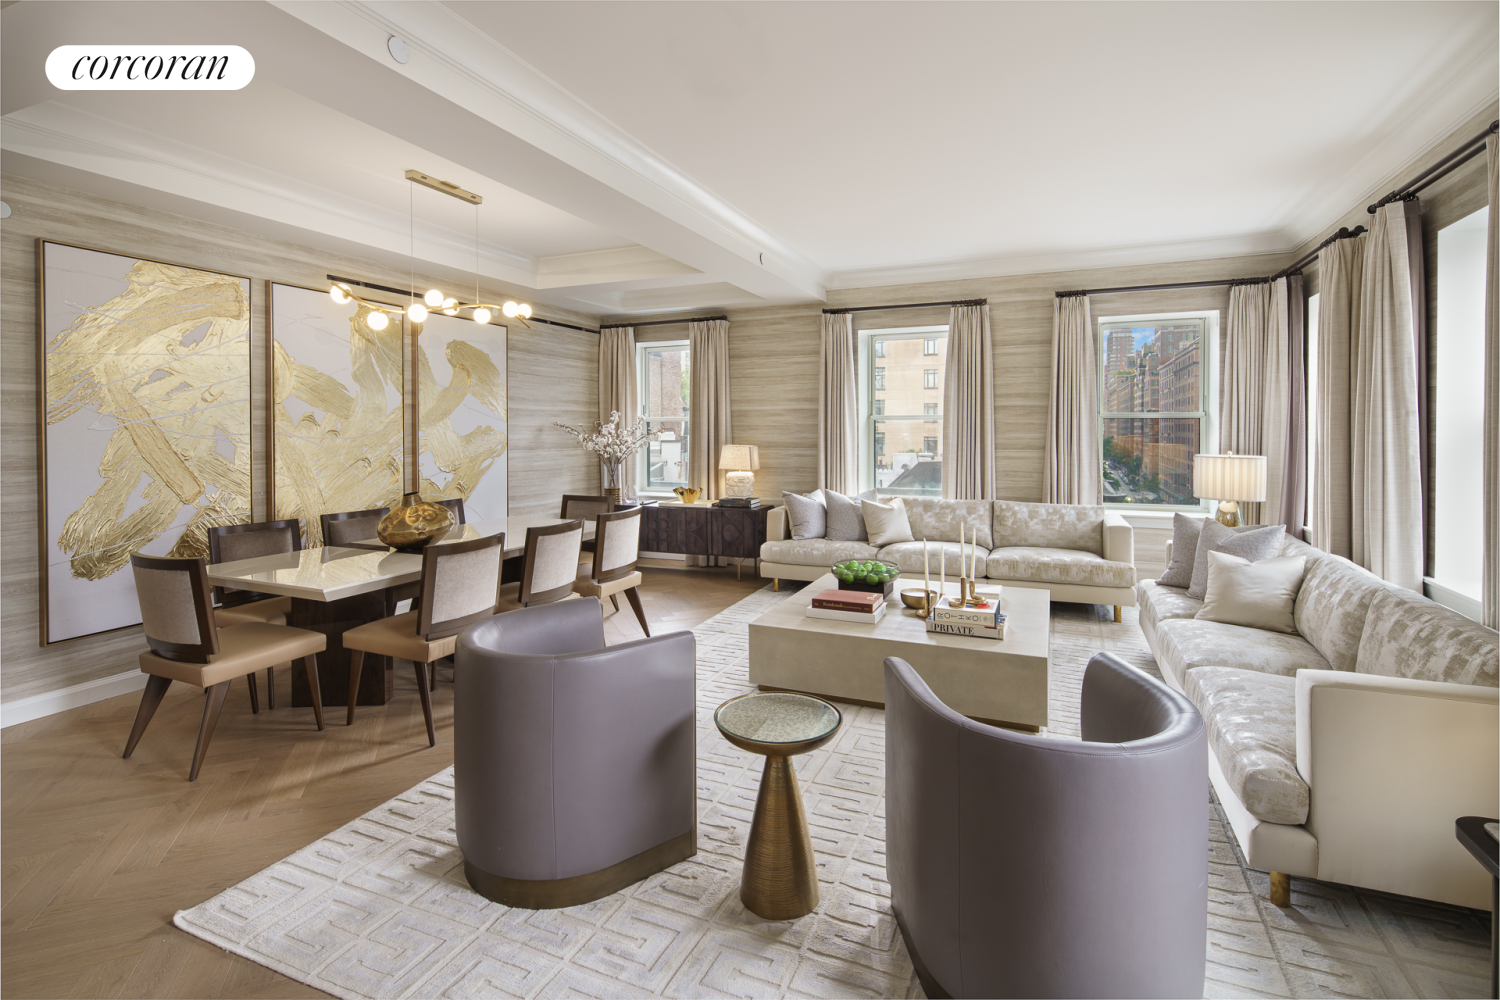 1295 Madison Avenue 7A, Carnegie Hill, Upper East Side, NYC - 4 Bedrooms  
4.5 Bathrooms  
8 Rooms - 